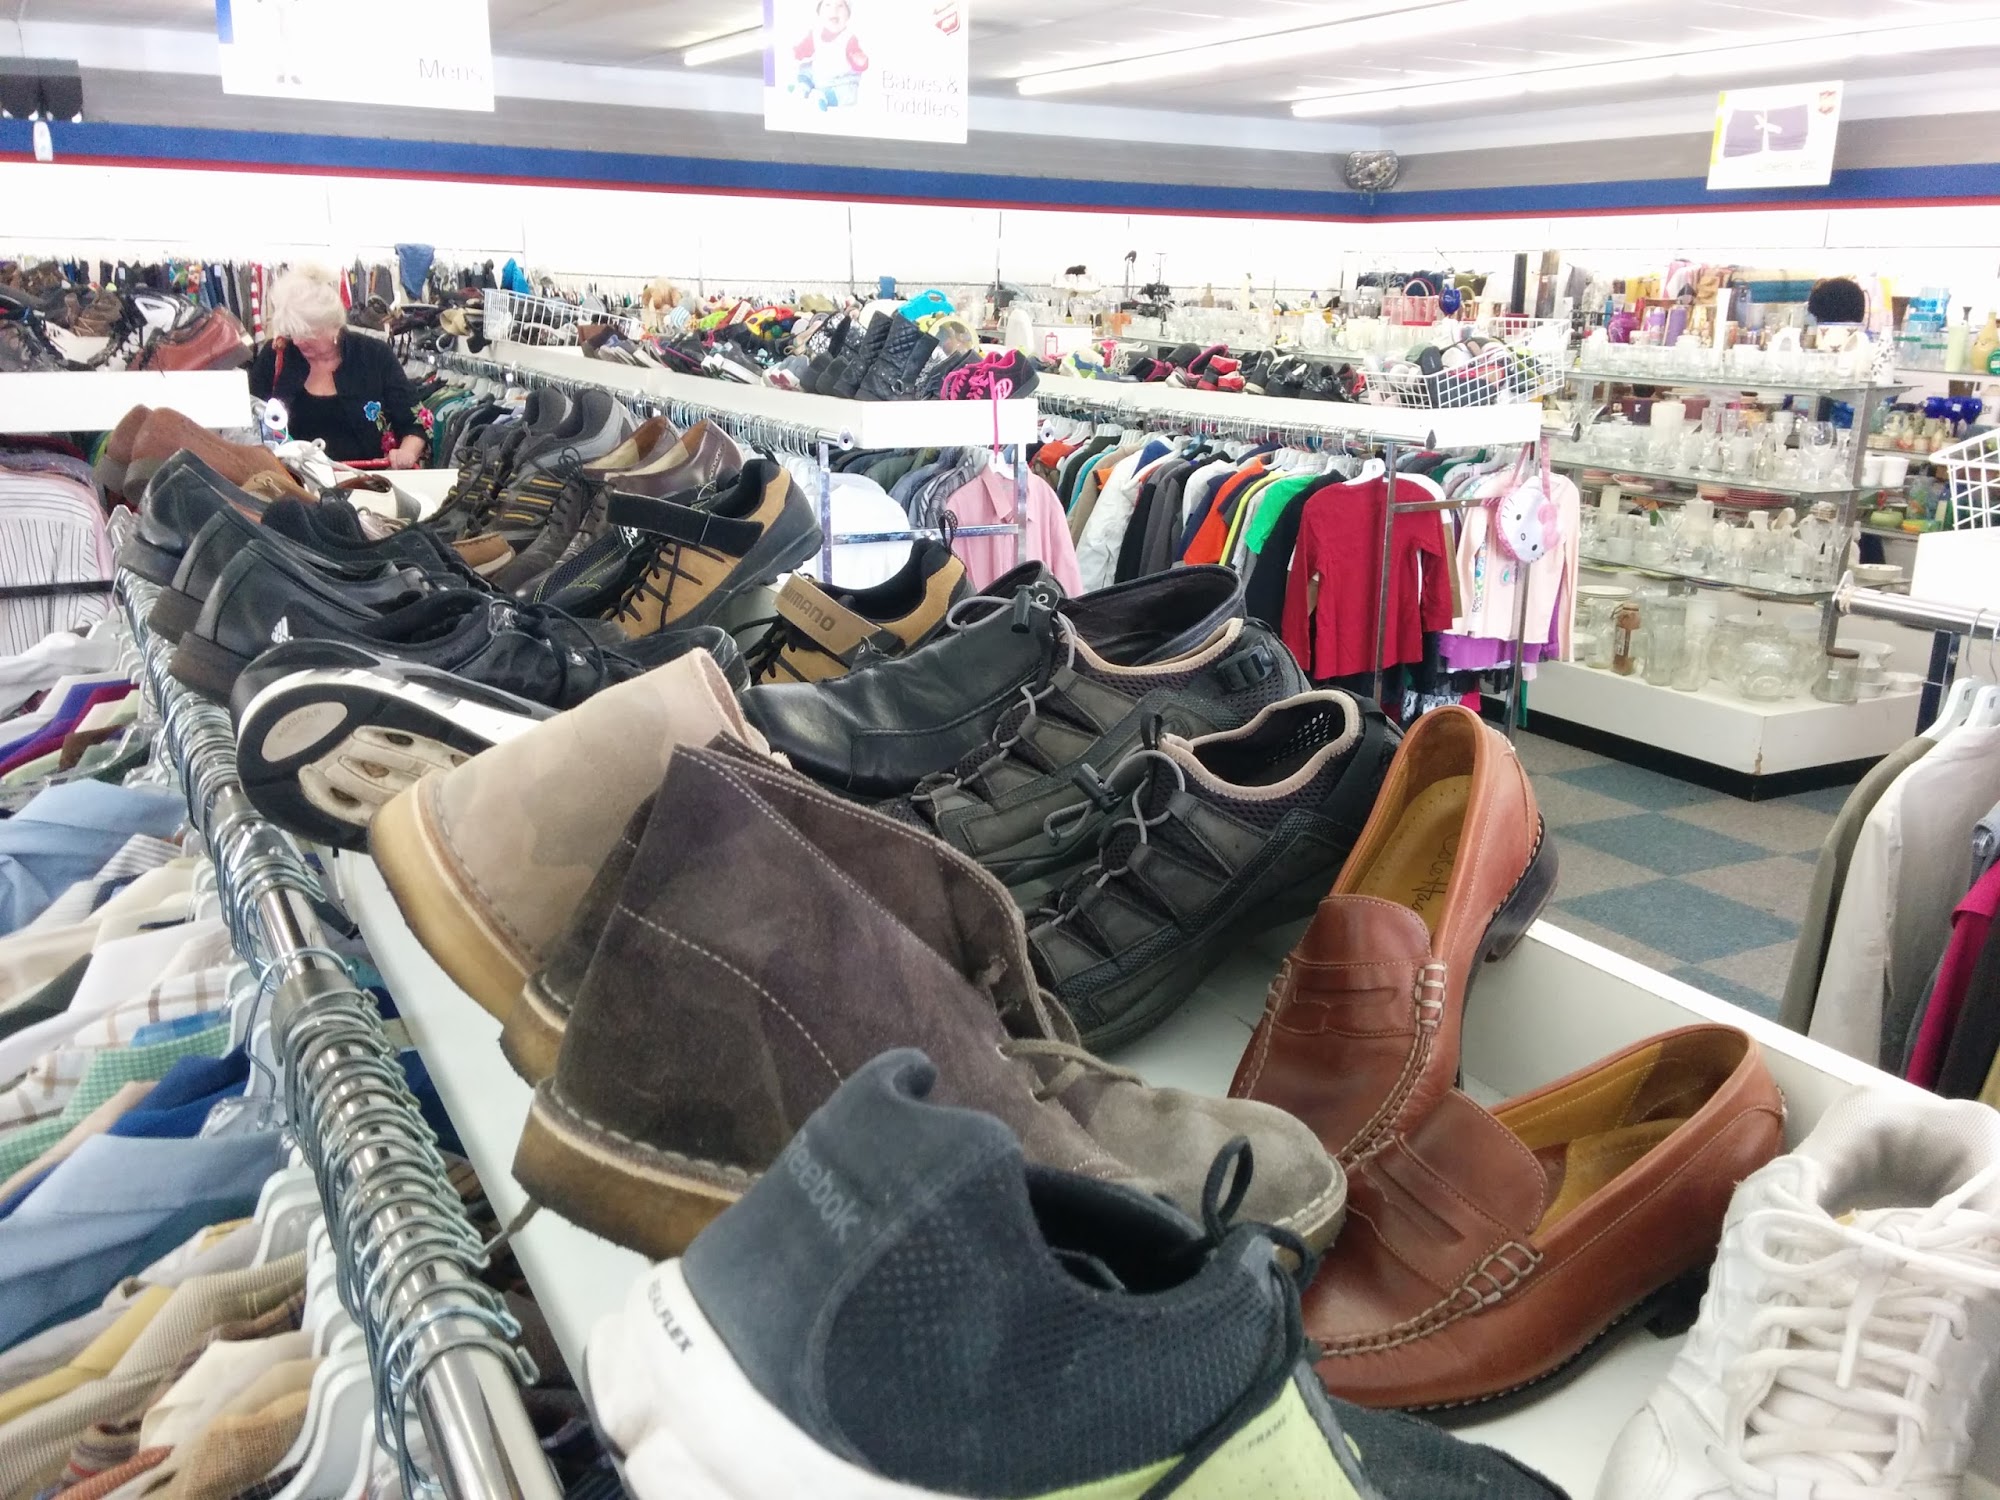 The Salvation Army Thrift Store